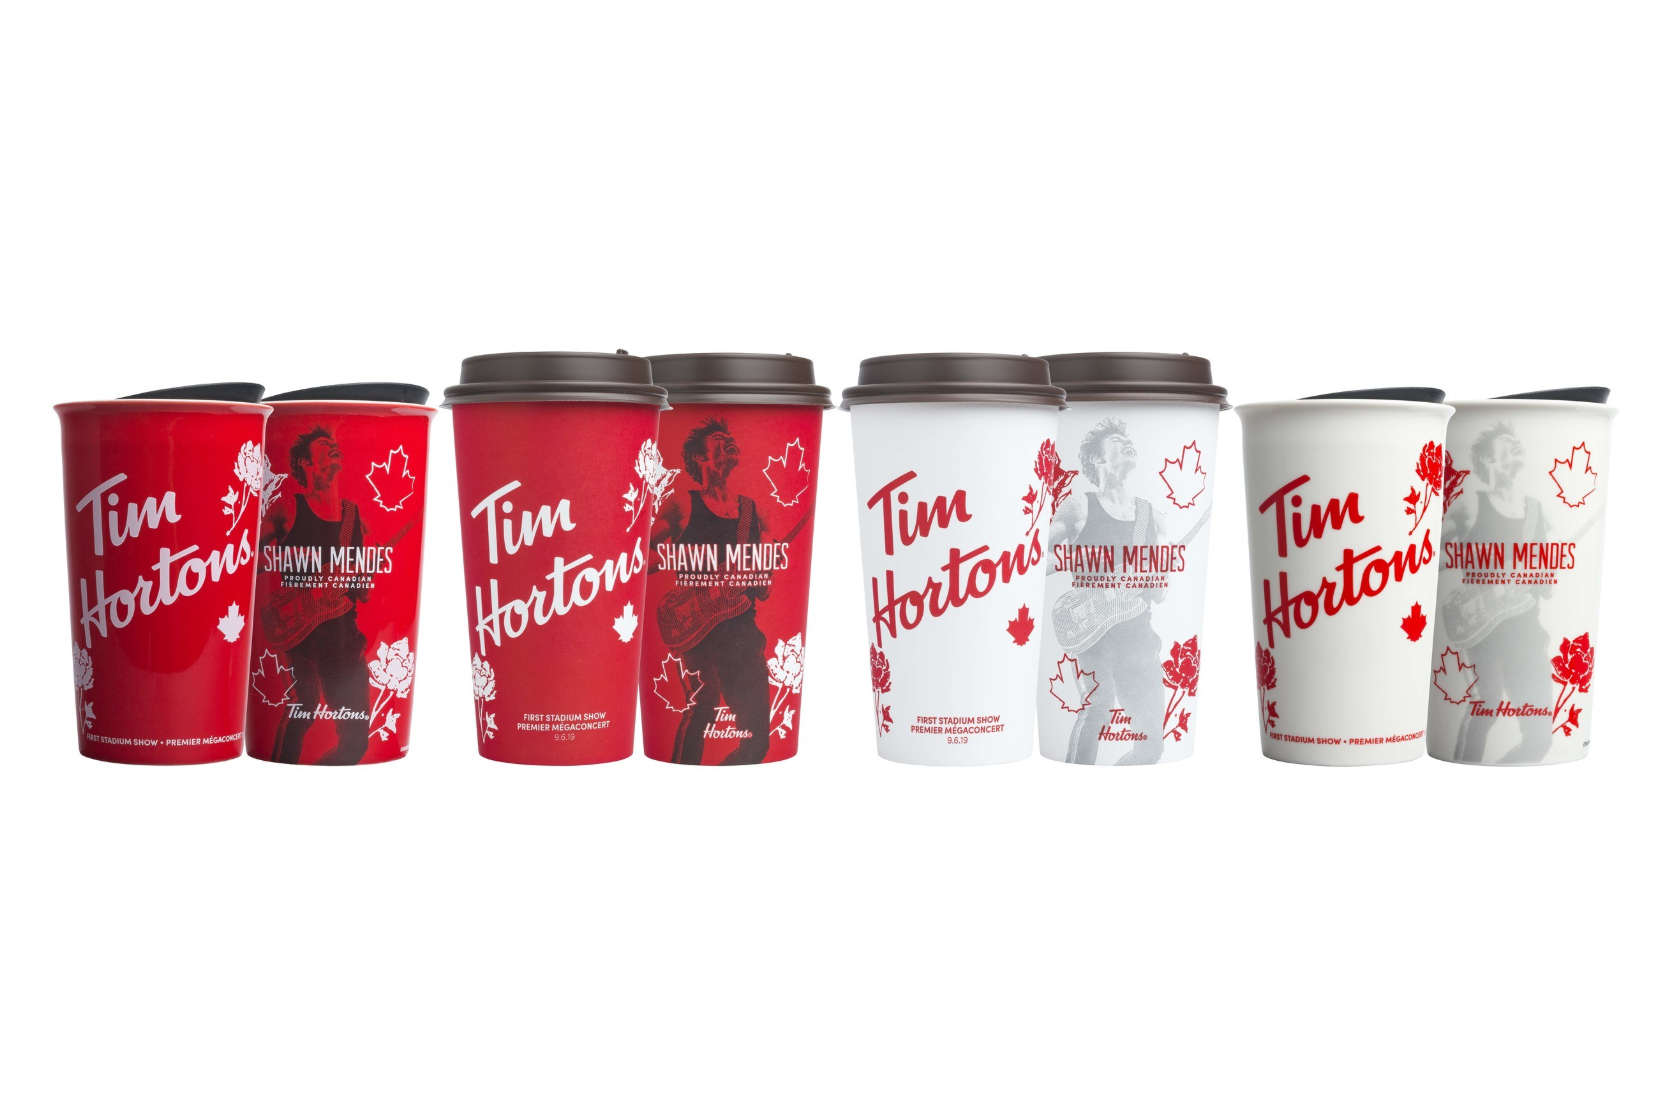 Tim Hortons, Toronto Maple Leafs partner to release limited Next